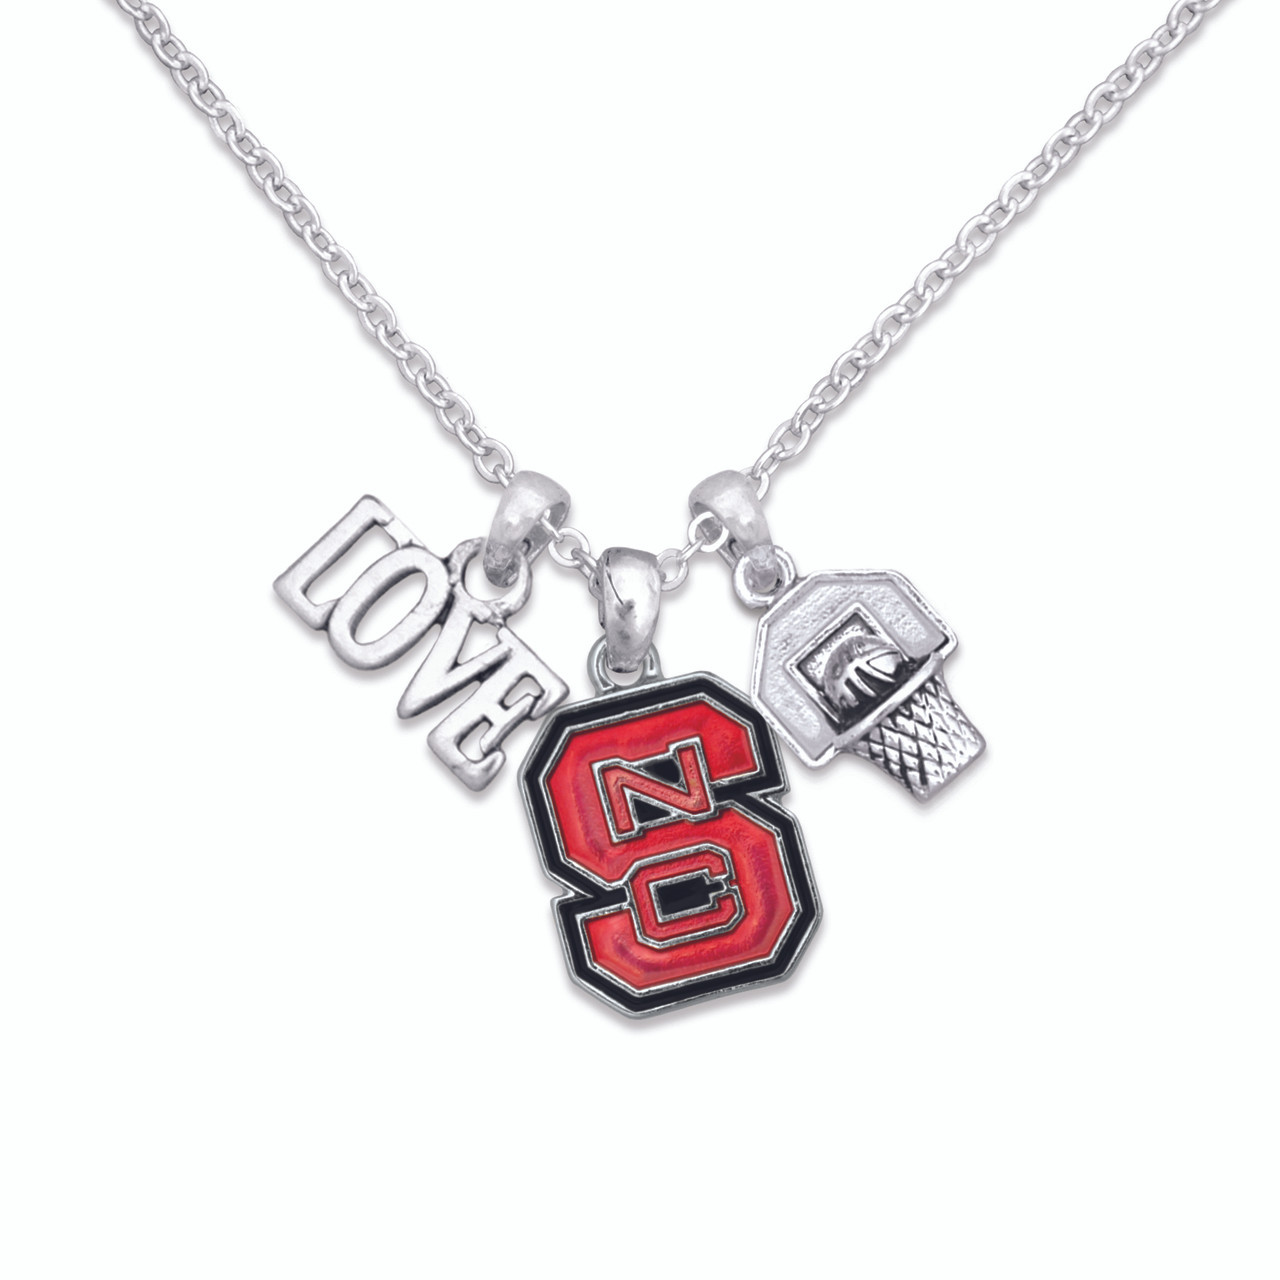 NC State Wolf Pack Slam Dunk Necklace